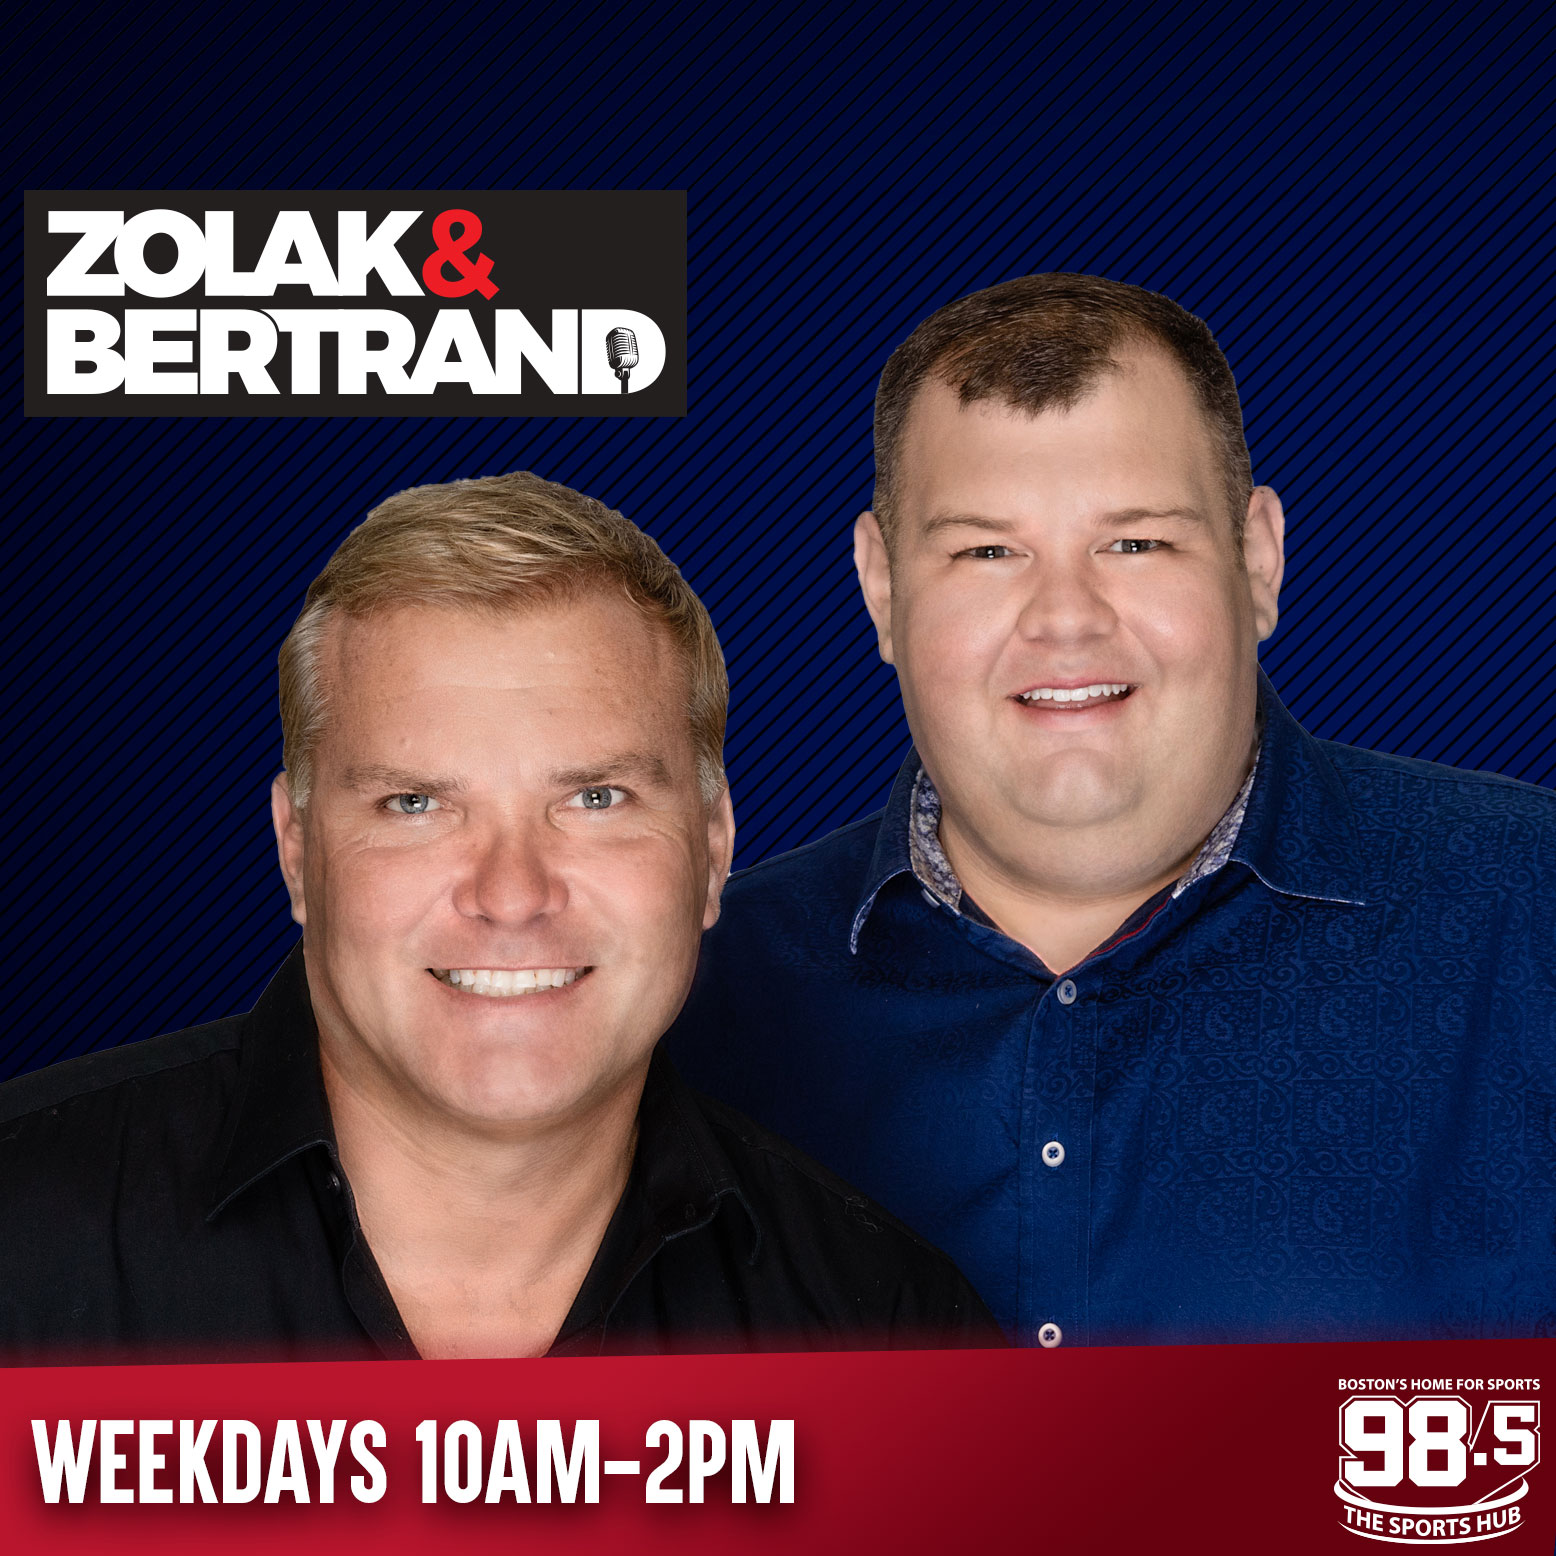 Zolak & Bertrand: Albert Breer says 'no light at the end of the tunnel' for the Patriots